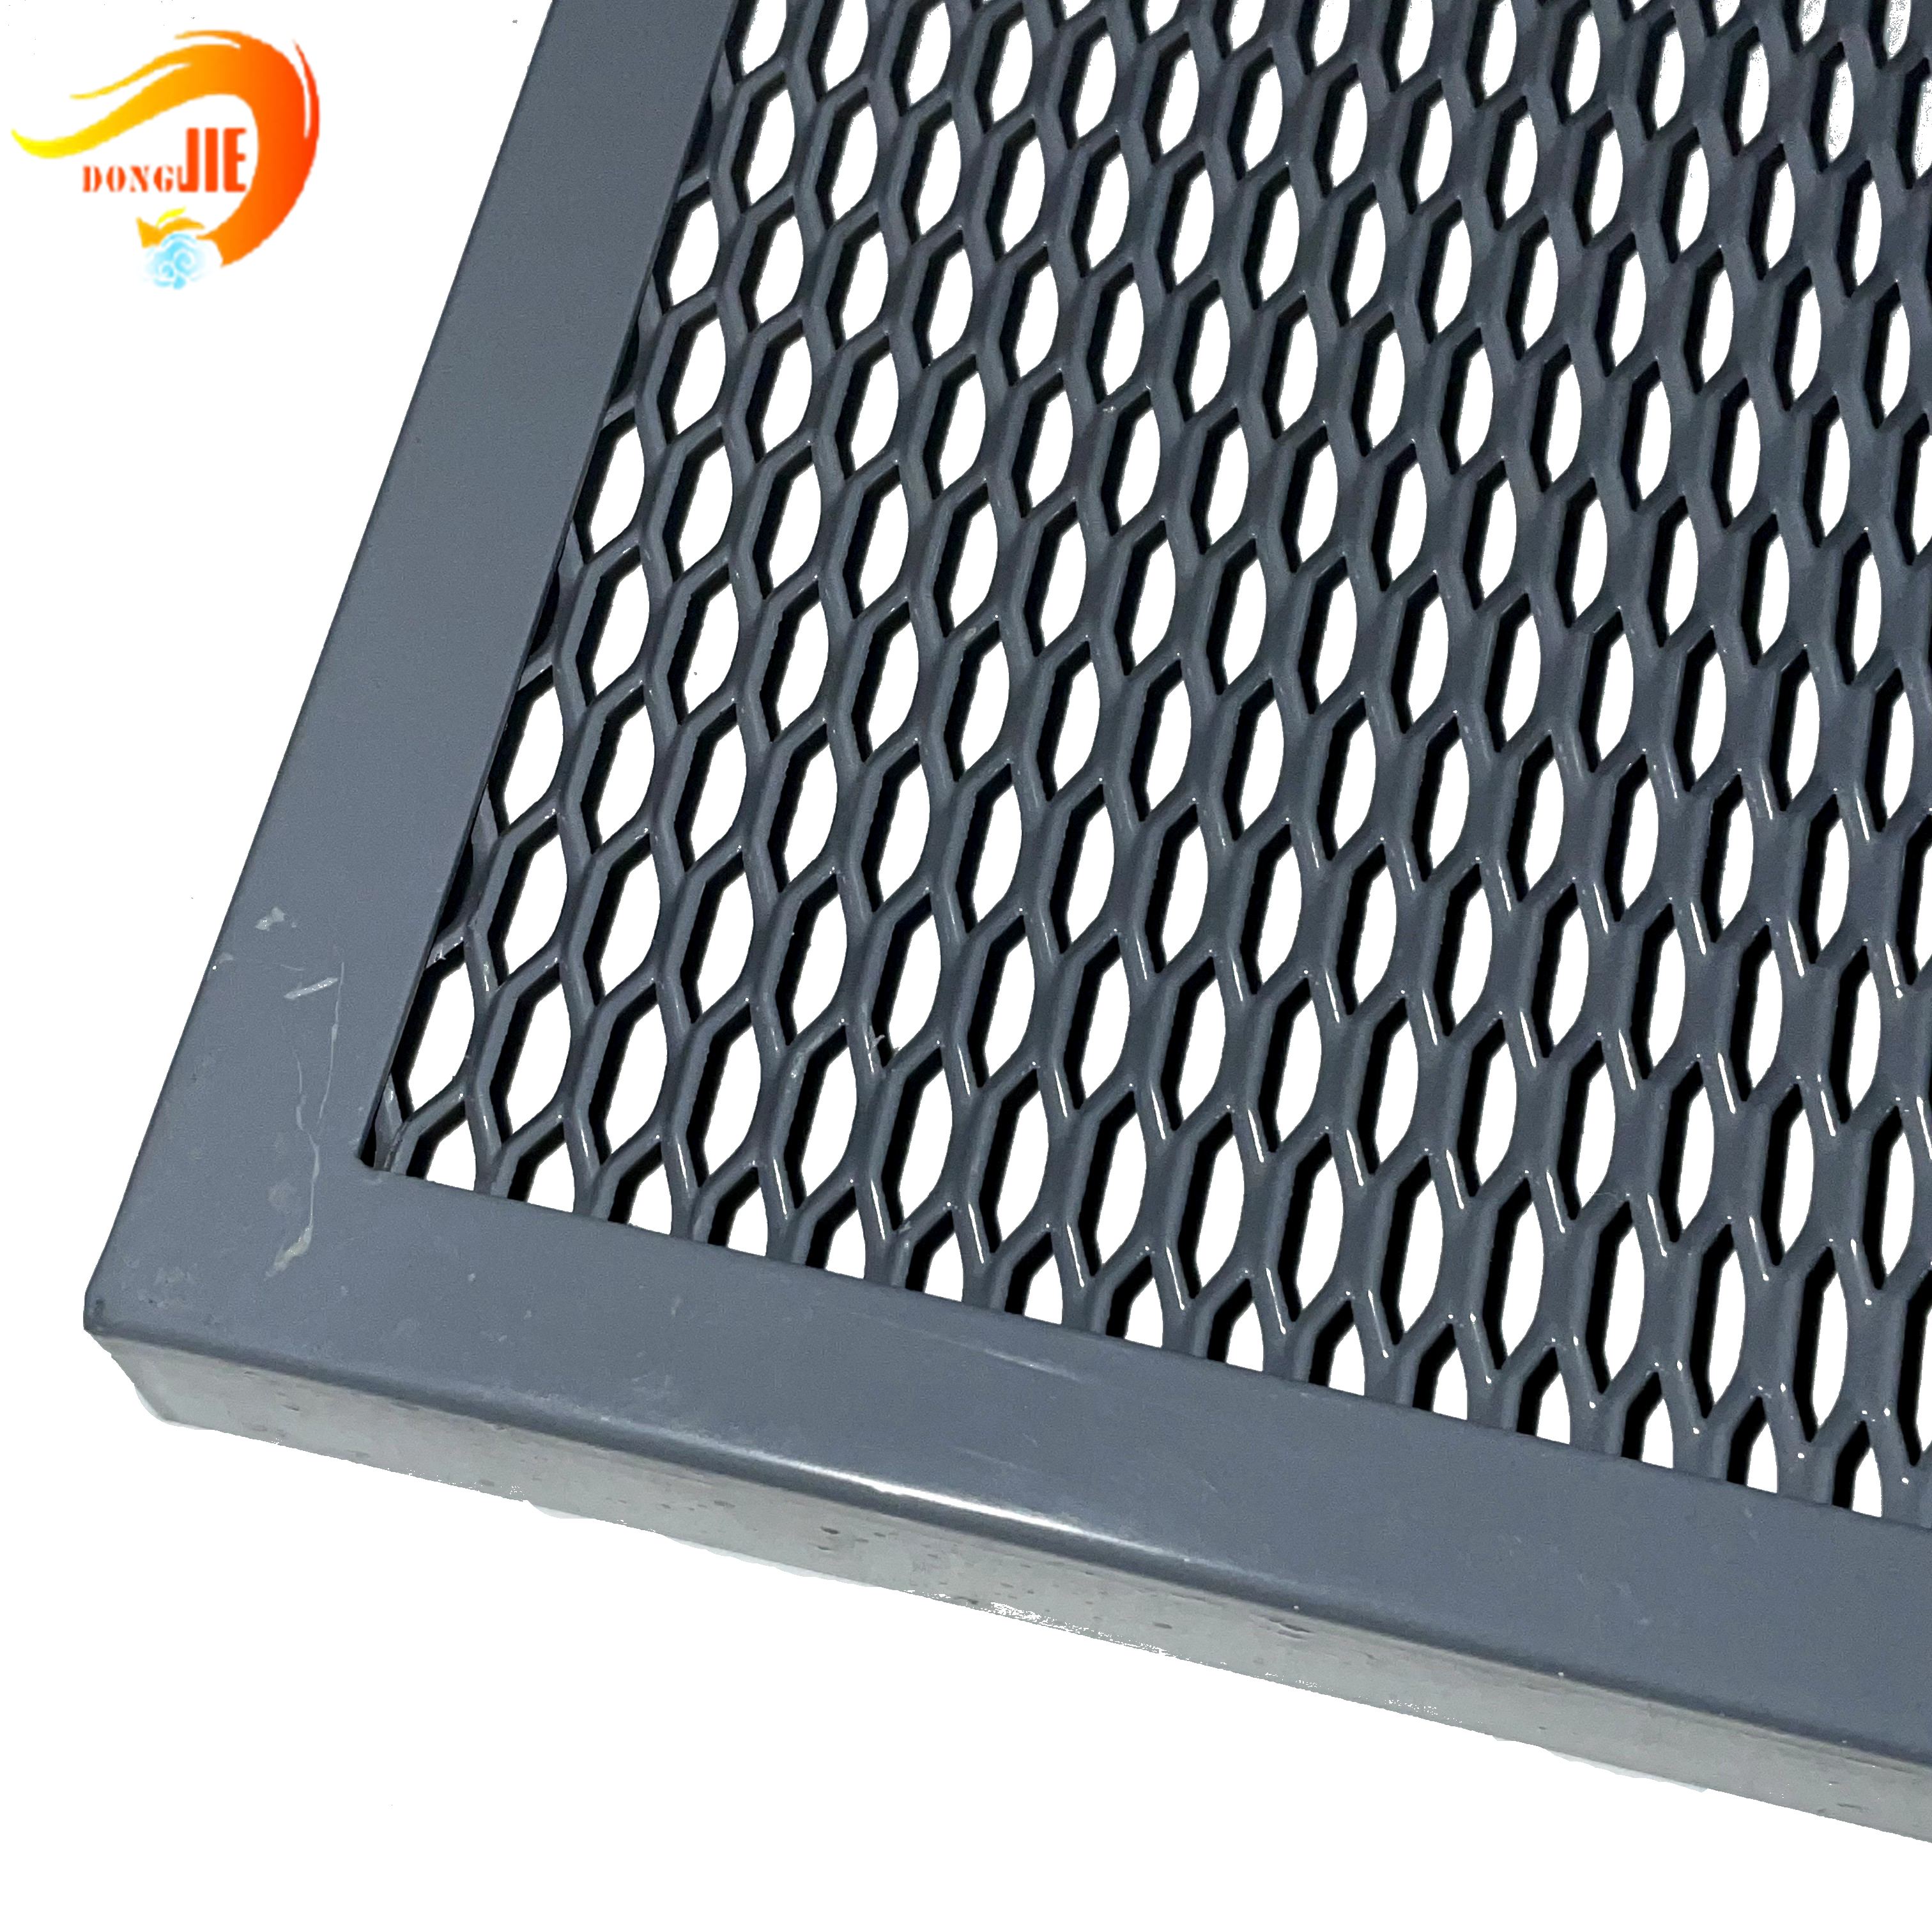 Reasonable price Decorative Expanded Metal - Modern Design Square Aluminum Frame Ceiling Grid  Suspended Ceilings Expanded Metal  – Dongjie